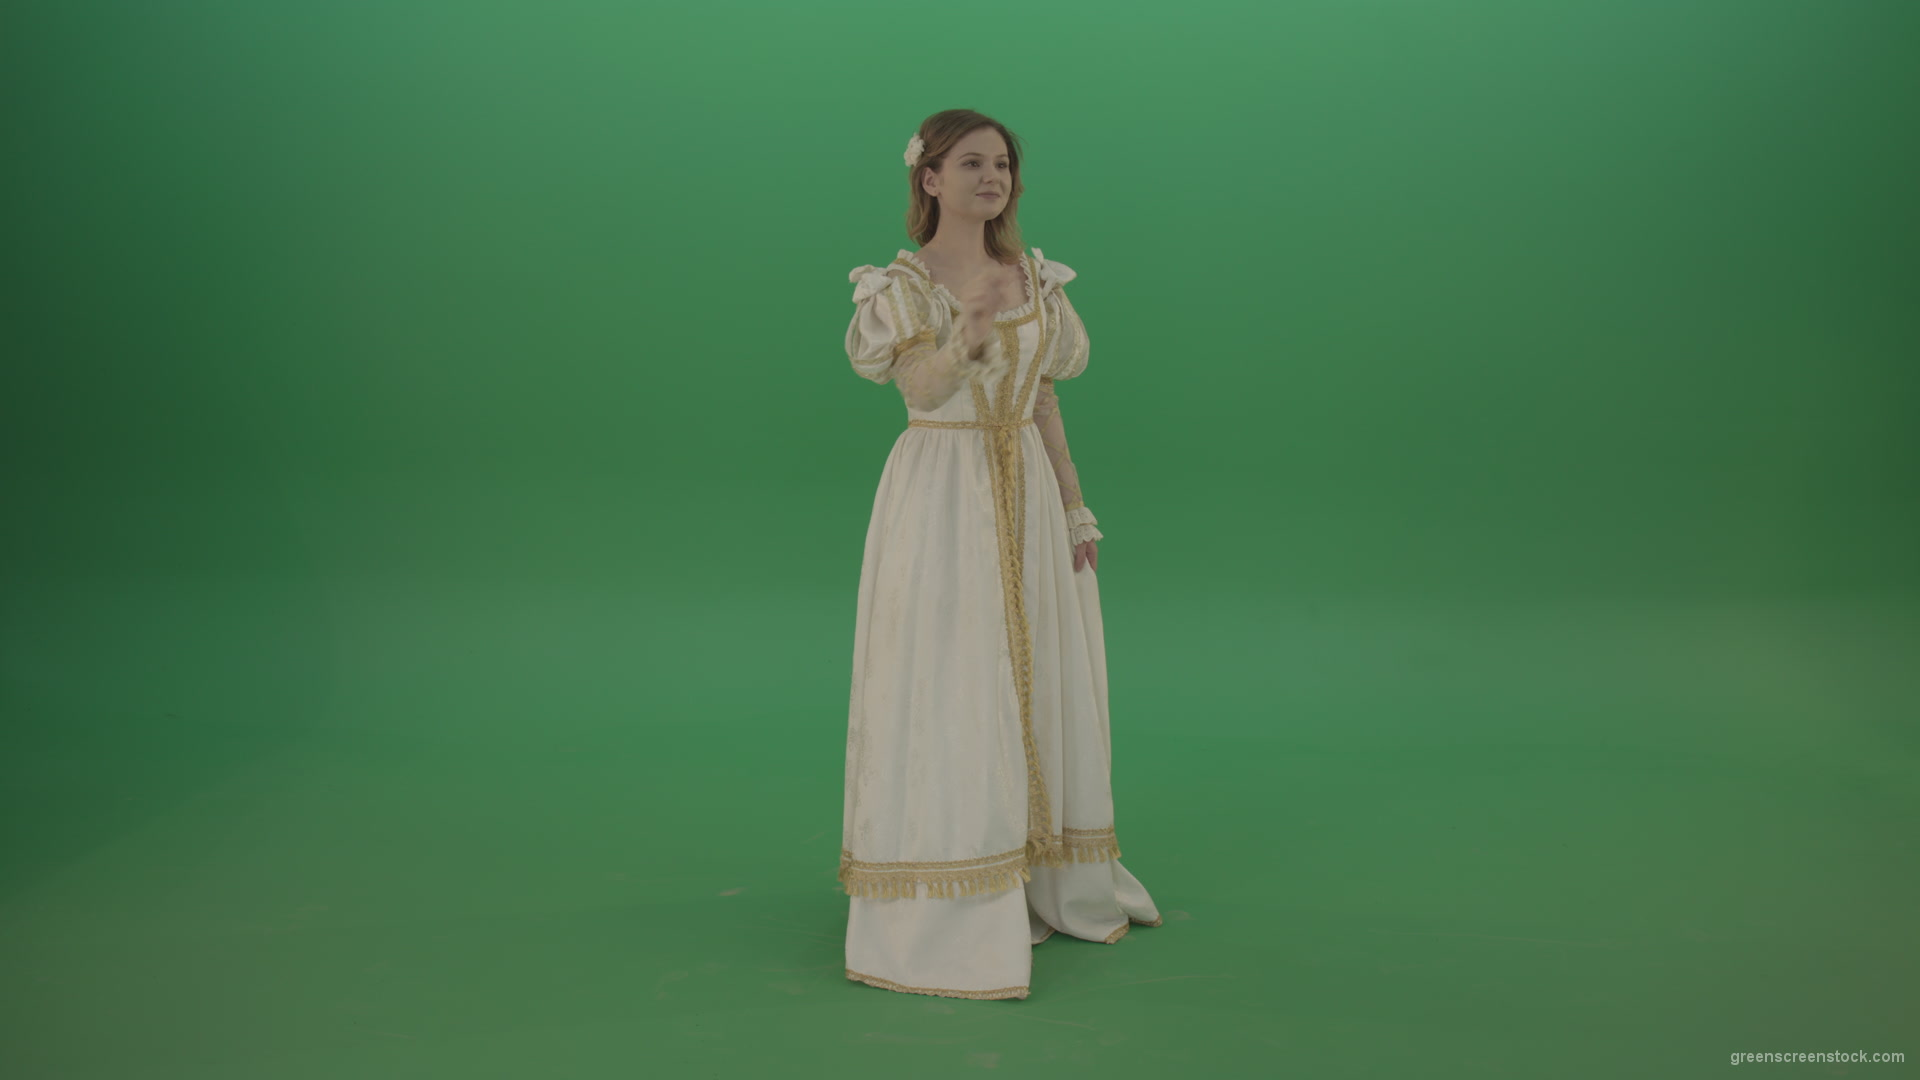 Flips-touchscreen-in-a-white-suit-of-a-medieval-woman-isolated-on-green-screen_008 Green Screen Stock